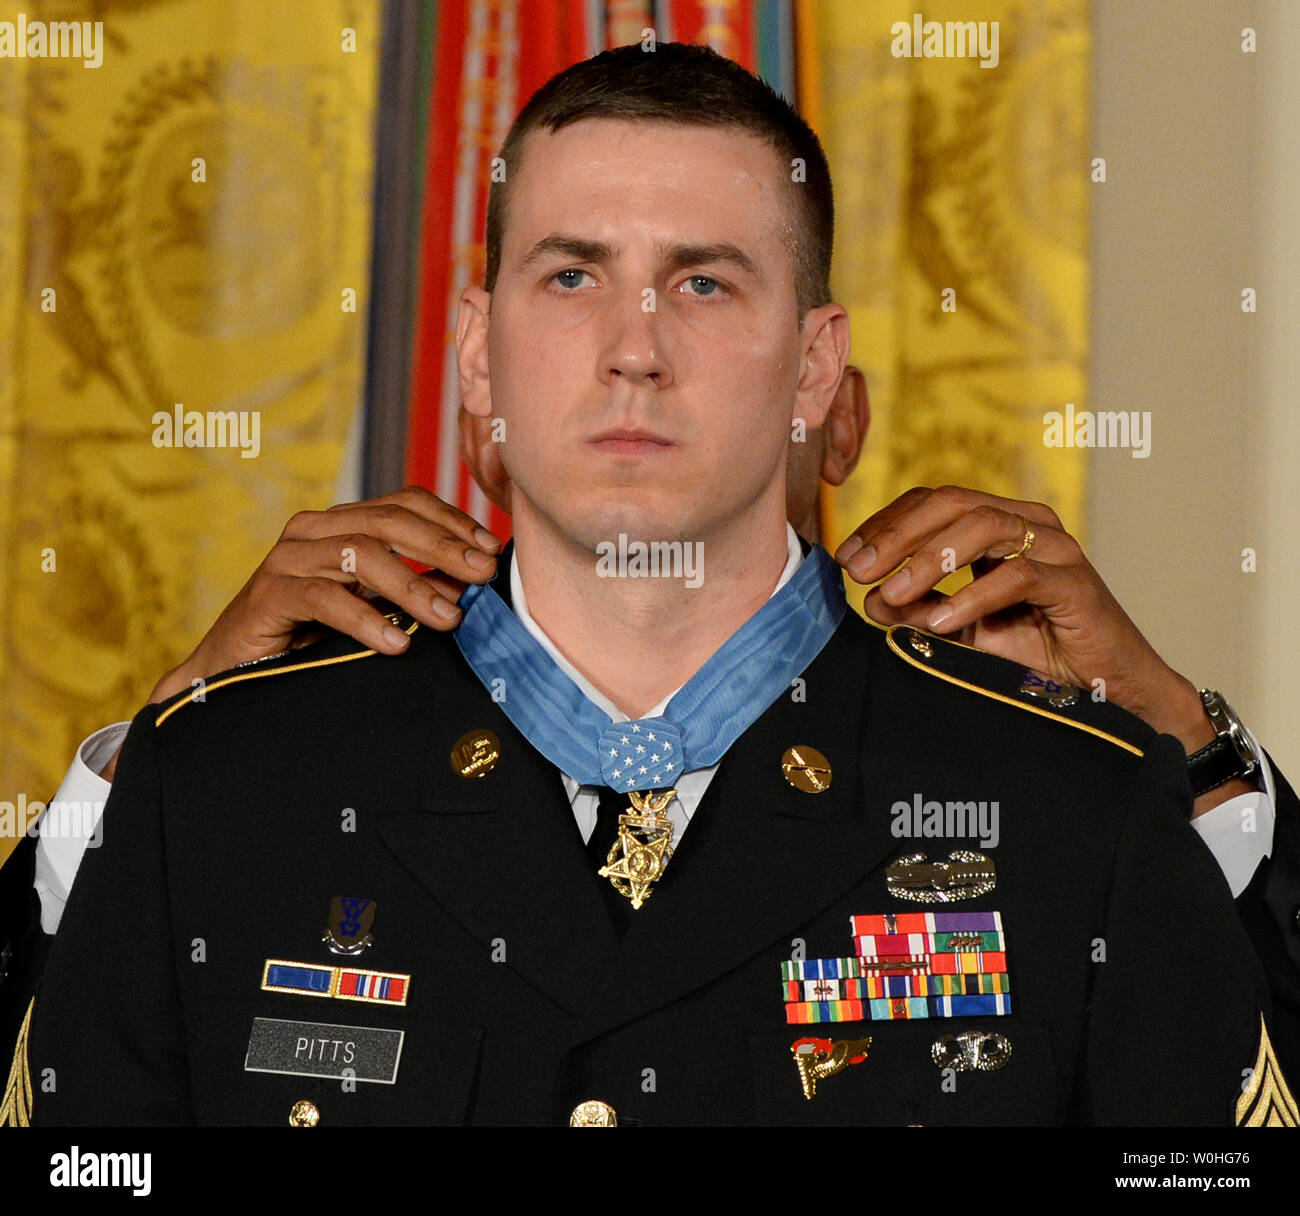 U.S. President Barack Obama presents the Medal of Honor to former Army Staff Sergeant Ryan Pitts during a ceremony in the East Room of the White House on July 21, 2014.  Pitts, from the 2nd Platoon, Chosen Company, 2nd Battalion (Airborne), 503rd Infantry Regiment, 173rd Airborne Brigade, was awarded the Nation's highest military honor for his courageous actions during combat operations at Vehicle Patrol Base Kahler in Kunar Province, Afghanistan on July 13, 2008.       UPI/Pat Benic Stock Photo